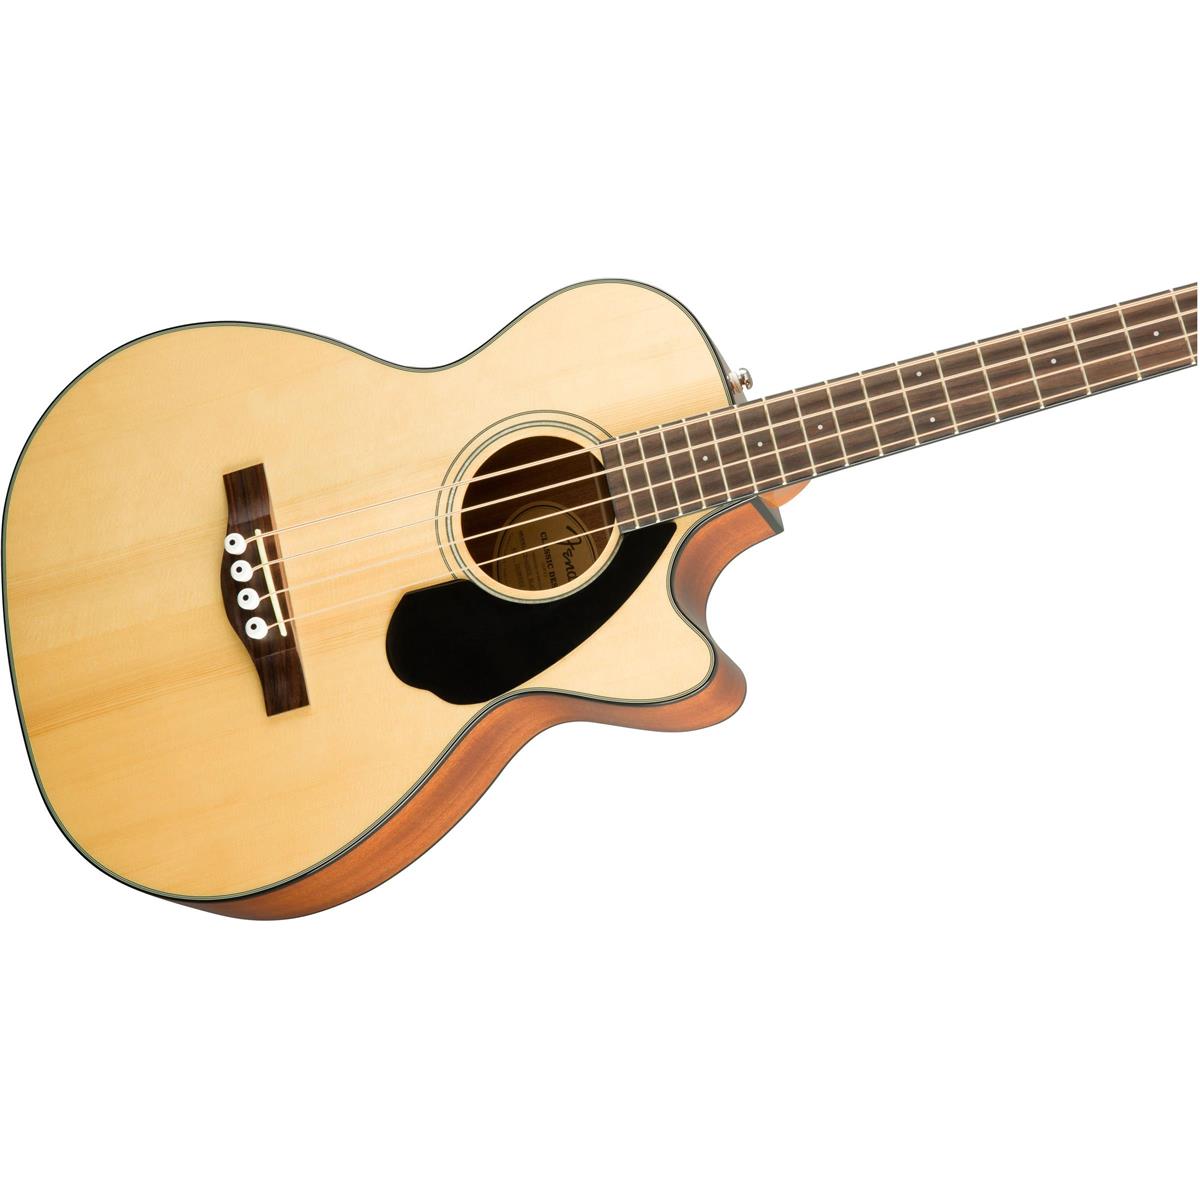 Fender CB-60SCE Concert Acoustic / Electric Bass Guitar or CC-60SCE Lefty $199 each + free s/h